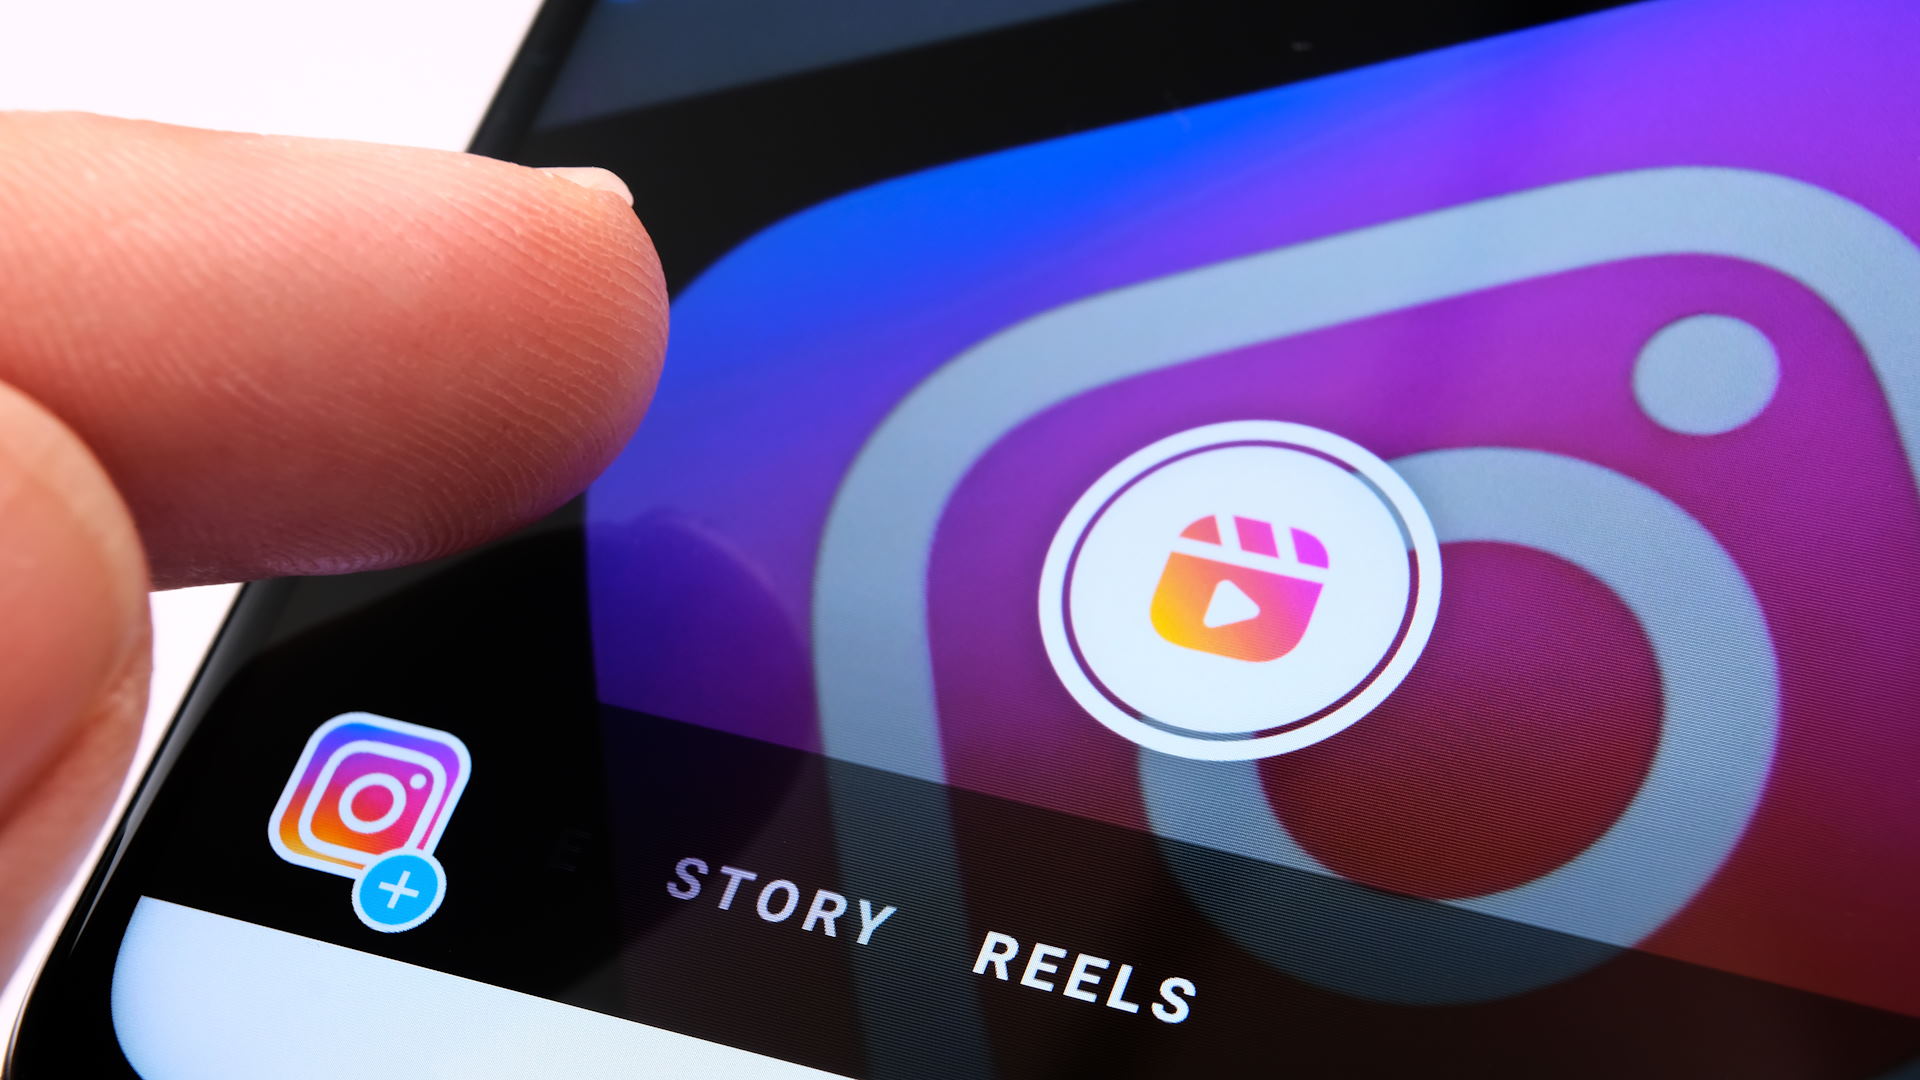 Instagram Reels are now available for anyone to download from within the app itself